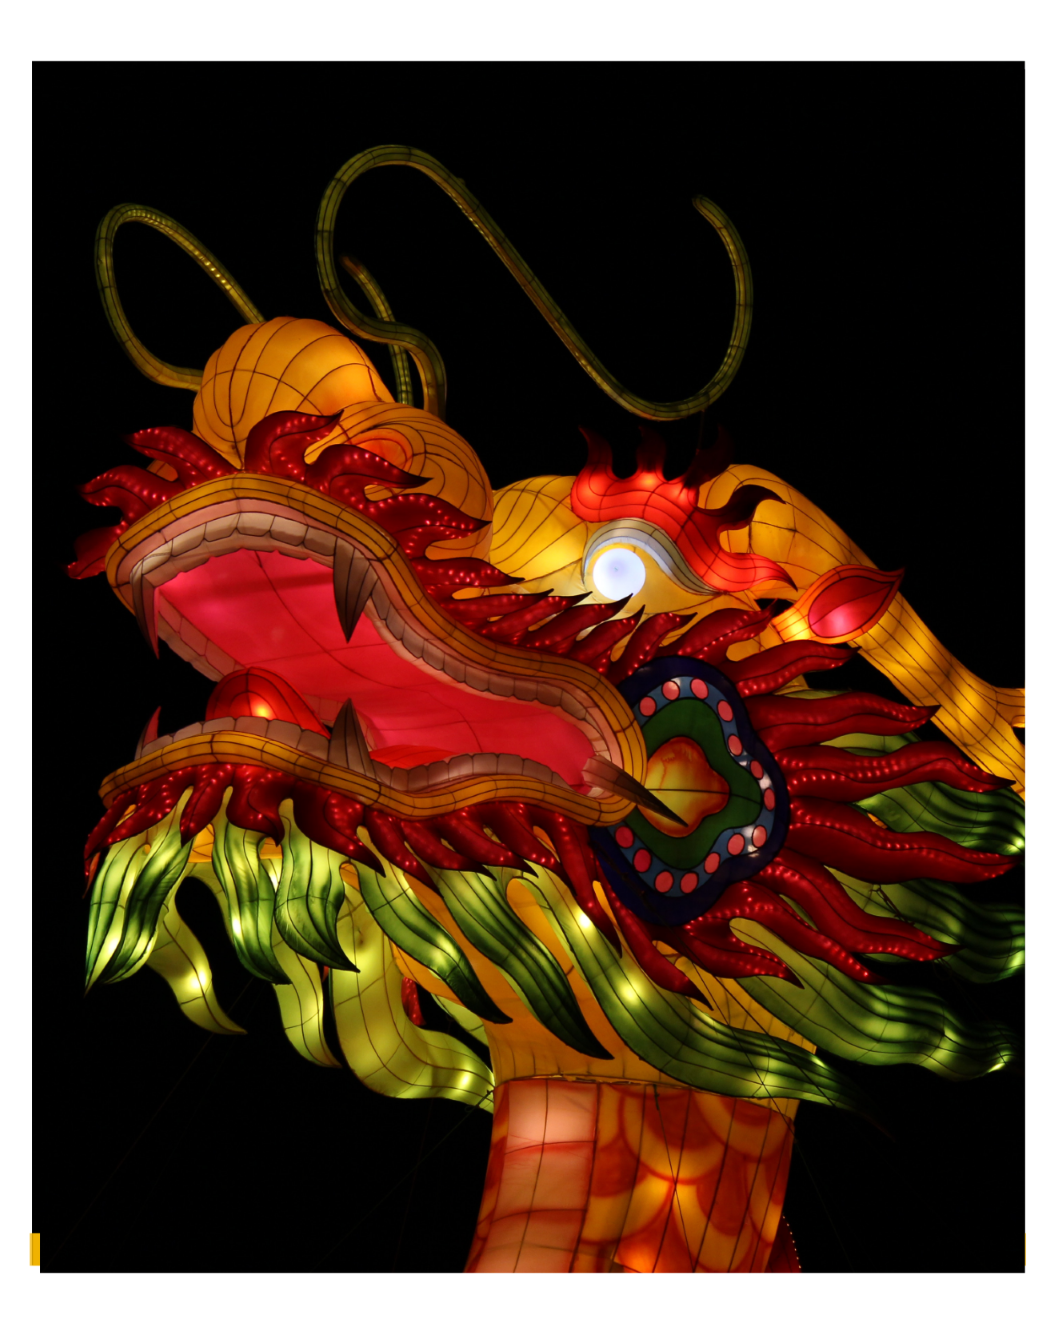 Beautiful image of a Chinese Wood Dragon for Chinese New Year of the Dragon